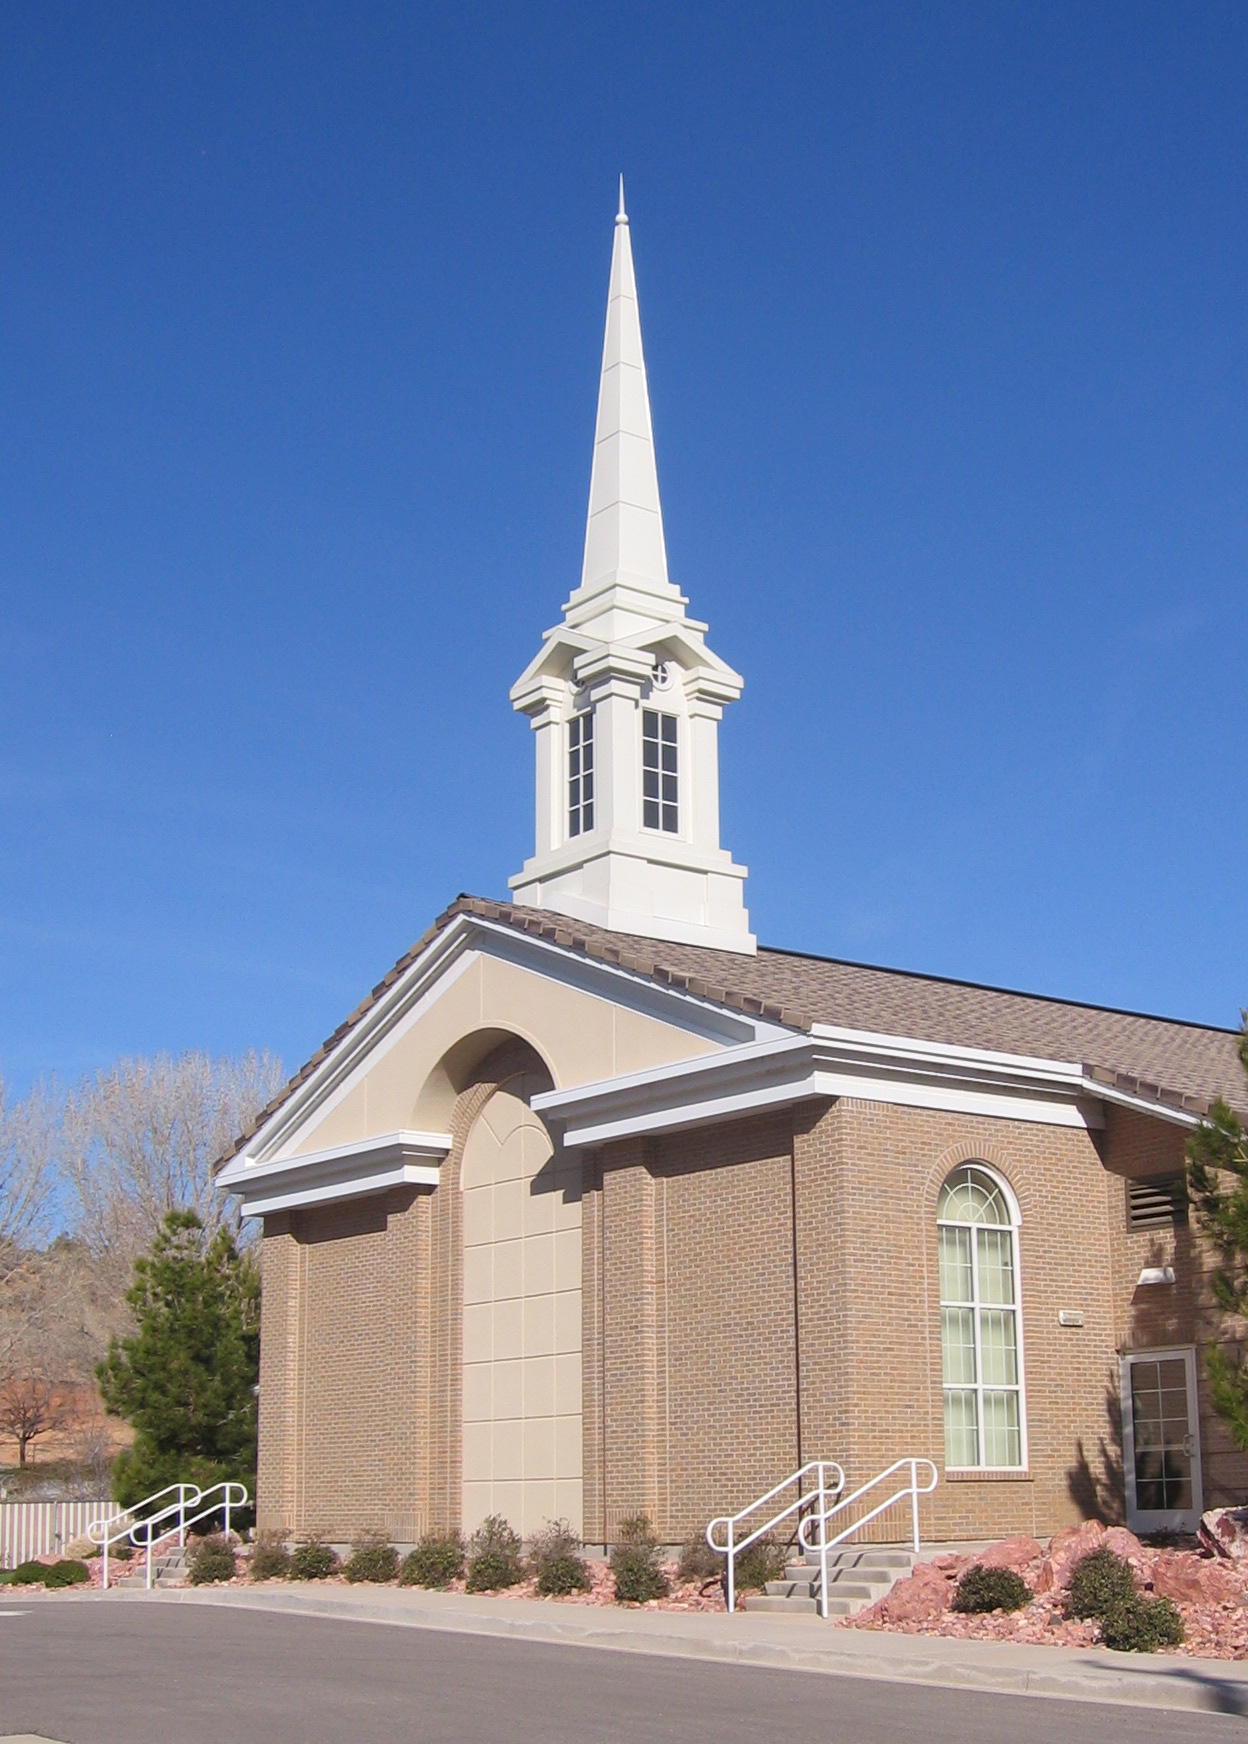 Front of the new Gunlock church